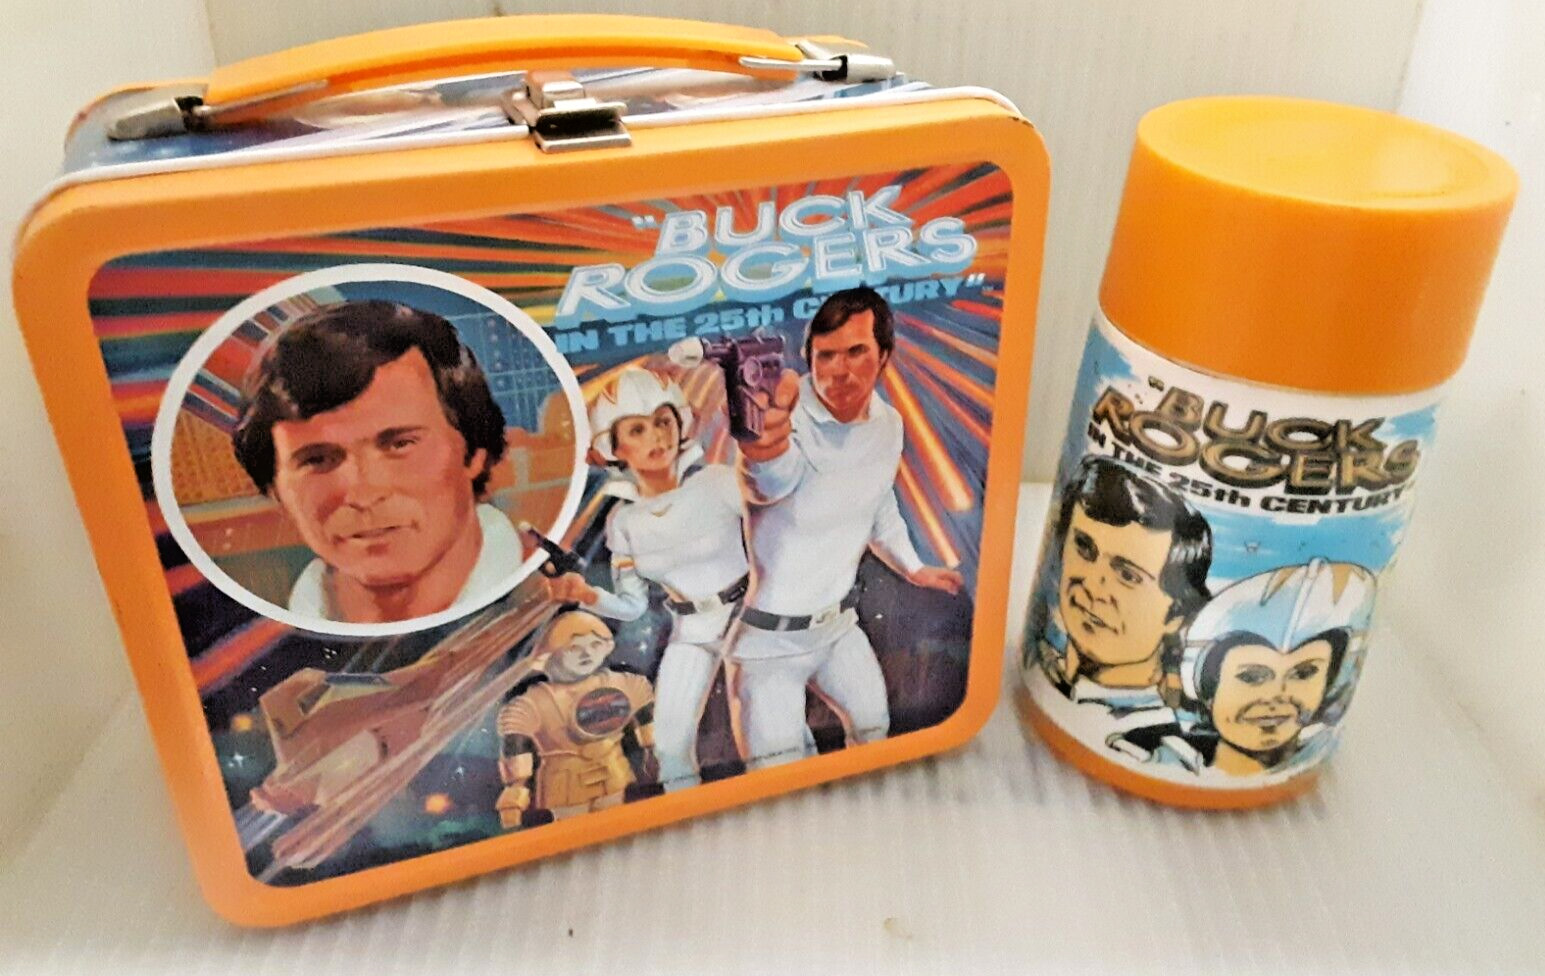 NEAR MINT 1979 Buck Rogers 25th Century Metal Lunch Box & Thermos Great Lunchbox